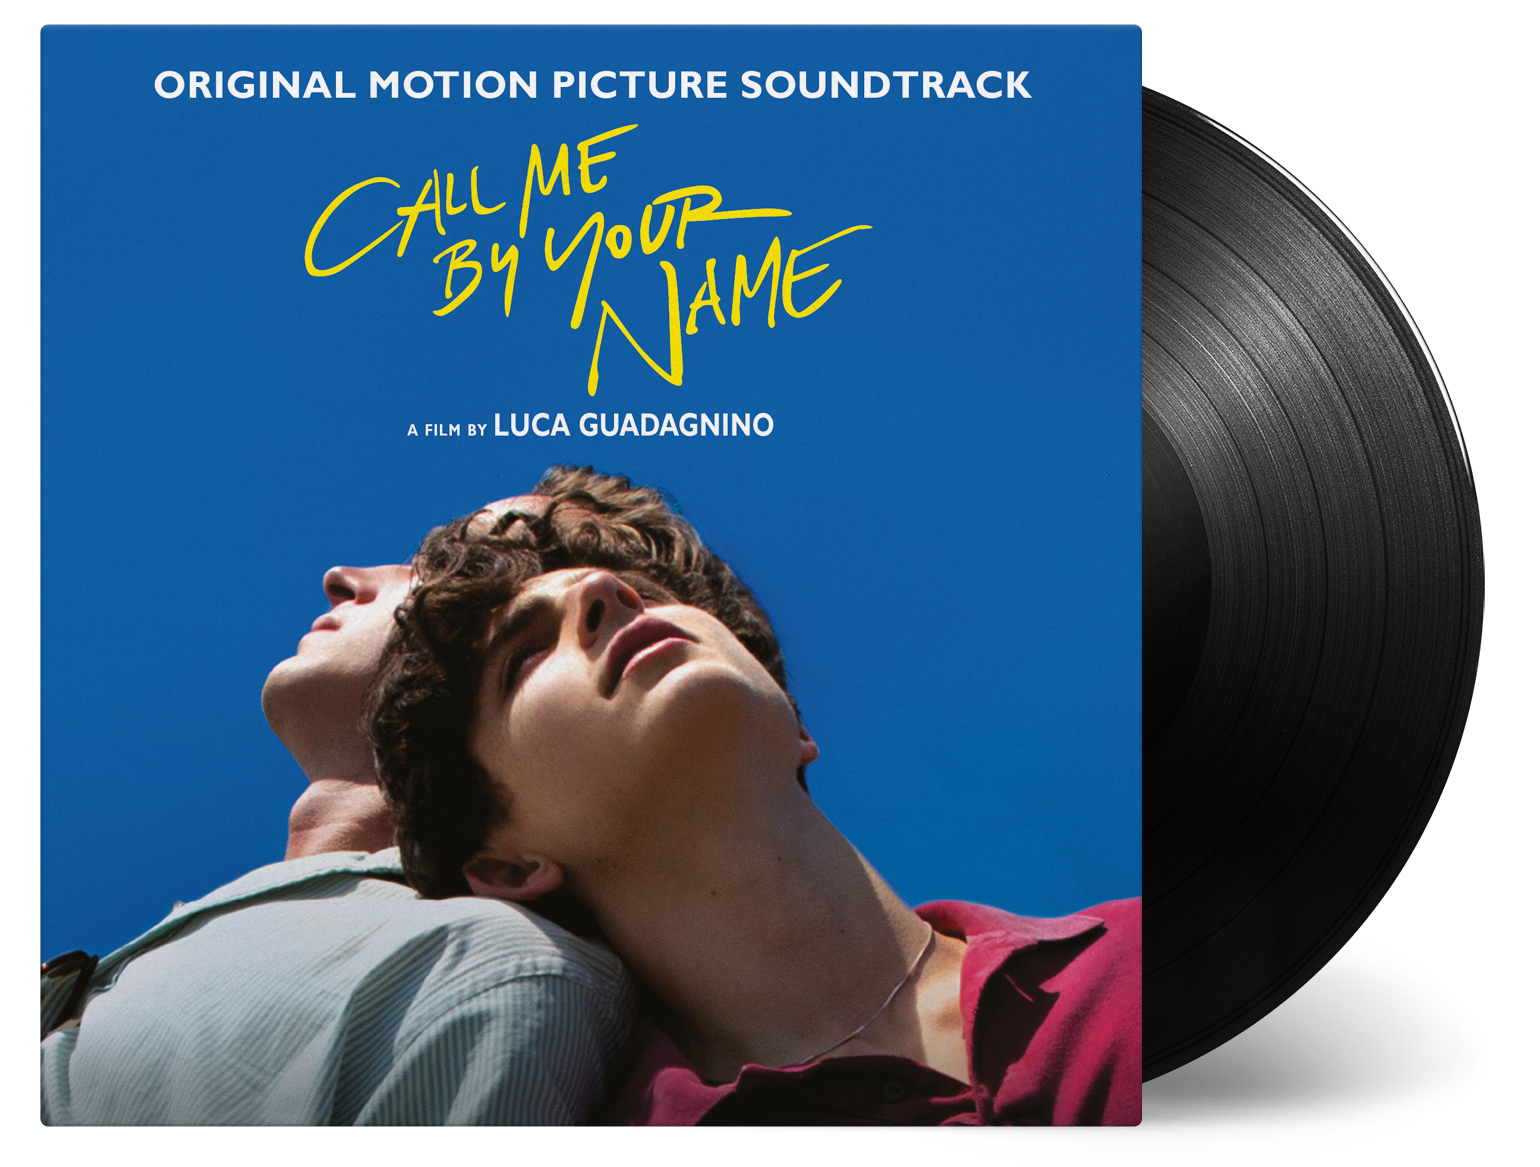 Call Me By Your Name (2lp Set) (Vinyl)